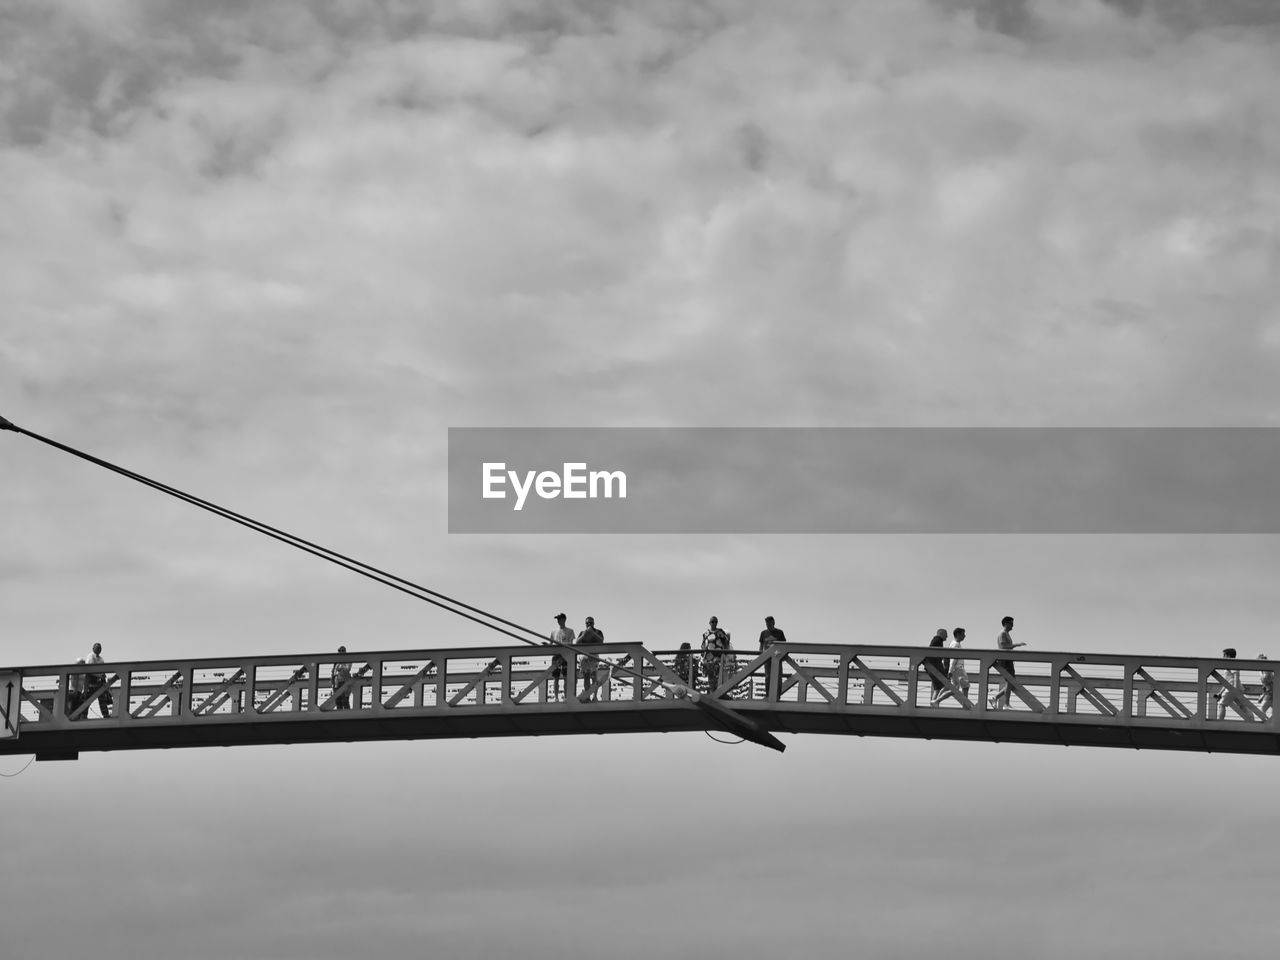 sky, architecture, bridge, built structure, cloud, black and white, nature, water, transportation, monochrome photography, monochrome, overcast, copy space, construction site, construction industry, industry, vehicle, outdoors, travel destinations, city, crane - construction machinery, day, travel, business finance and industry, line, metal, silhouette, tourism, low angle view, no people, fog, sea, business, machinery